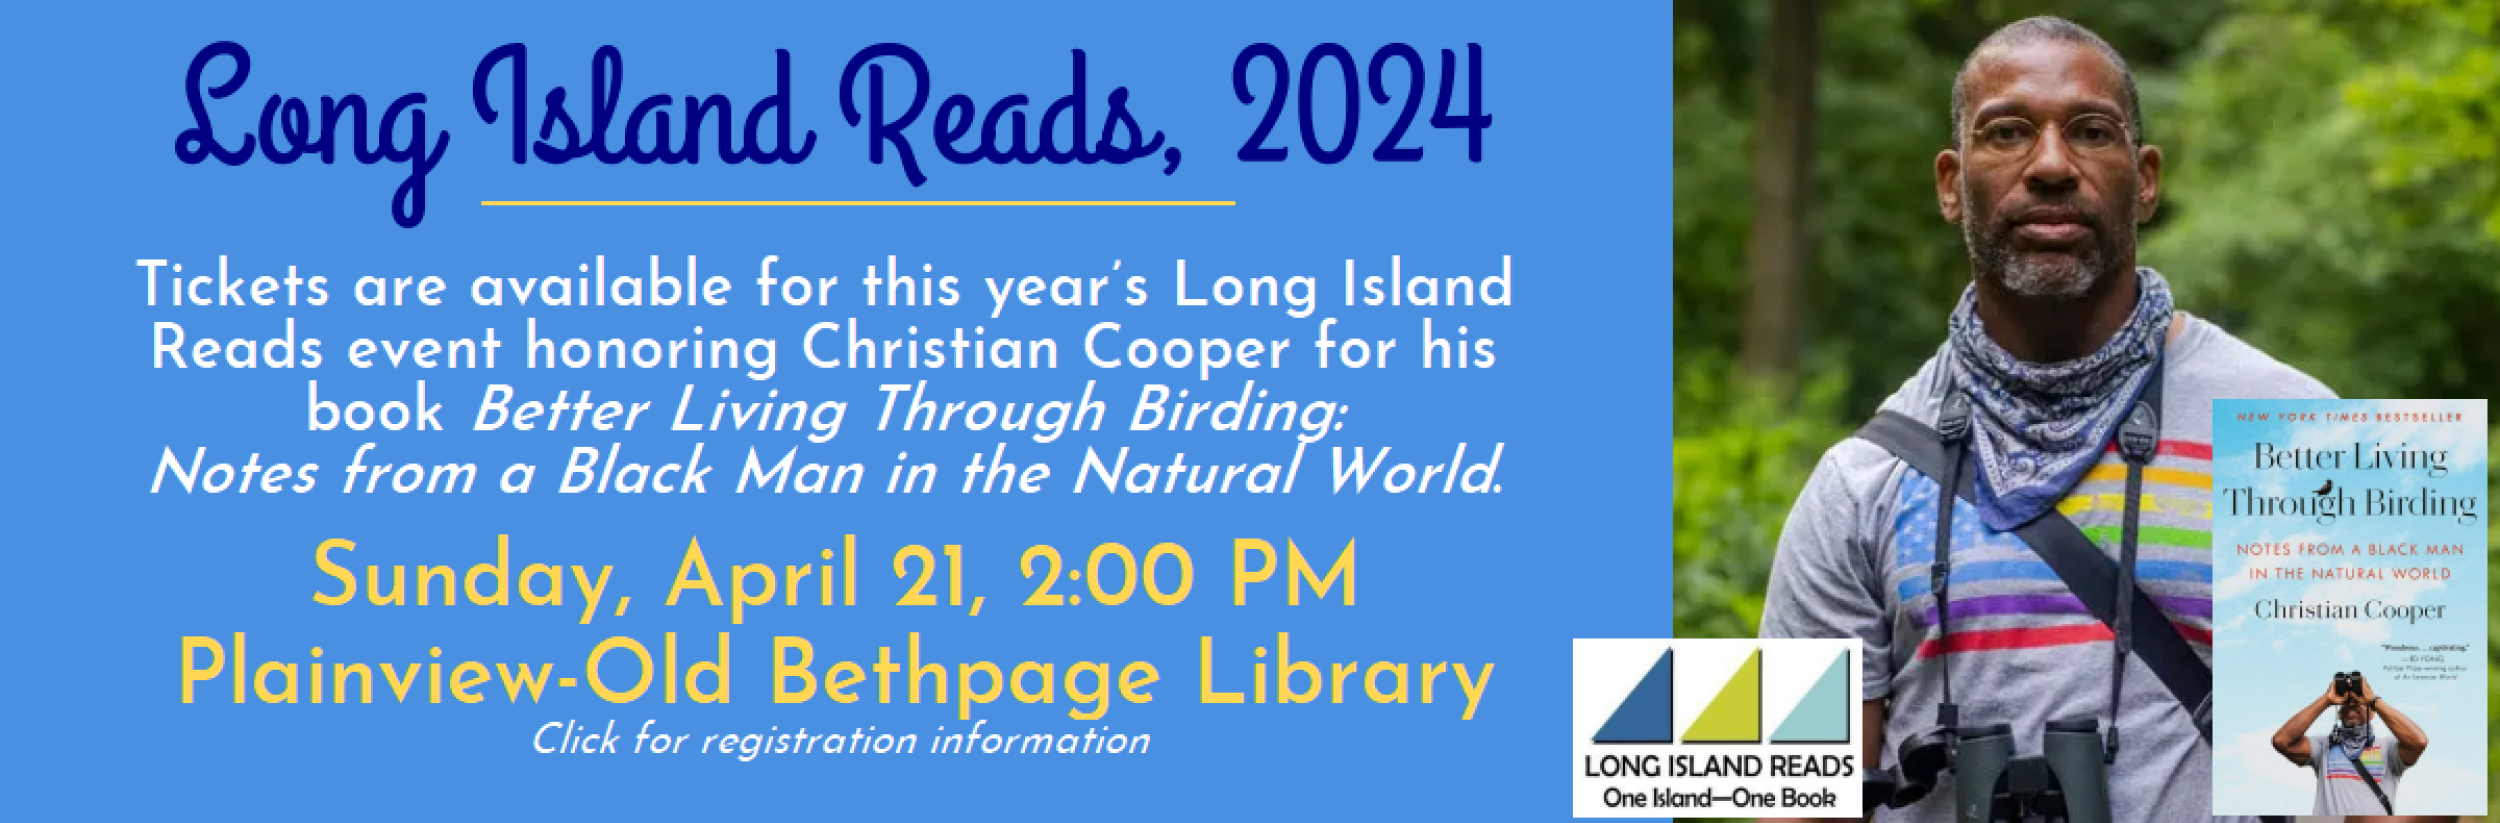 Image for "Long Island Reads 2024 Event"